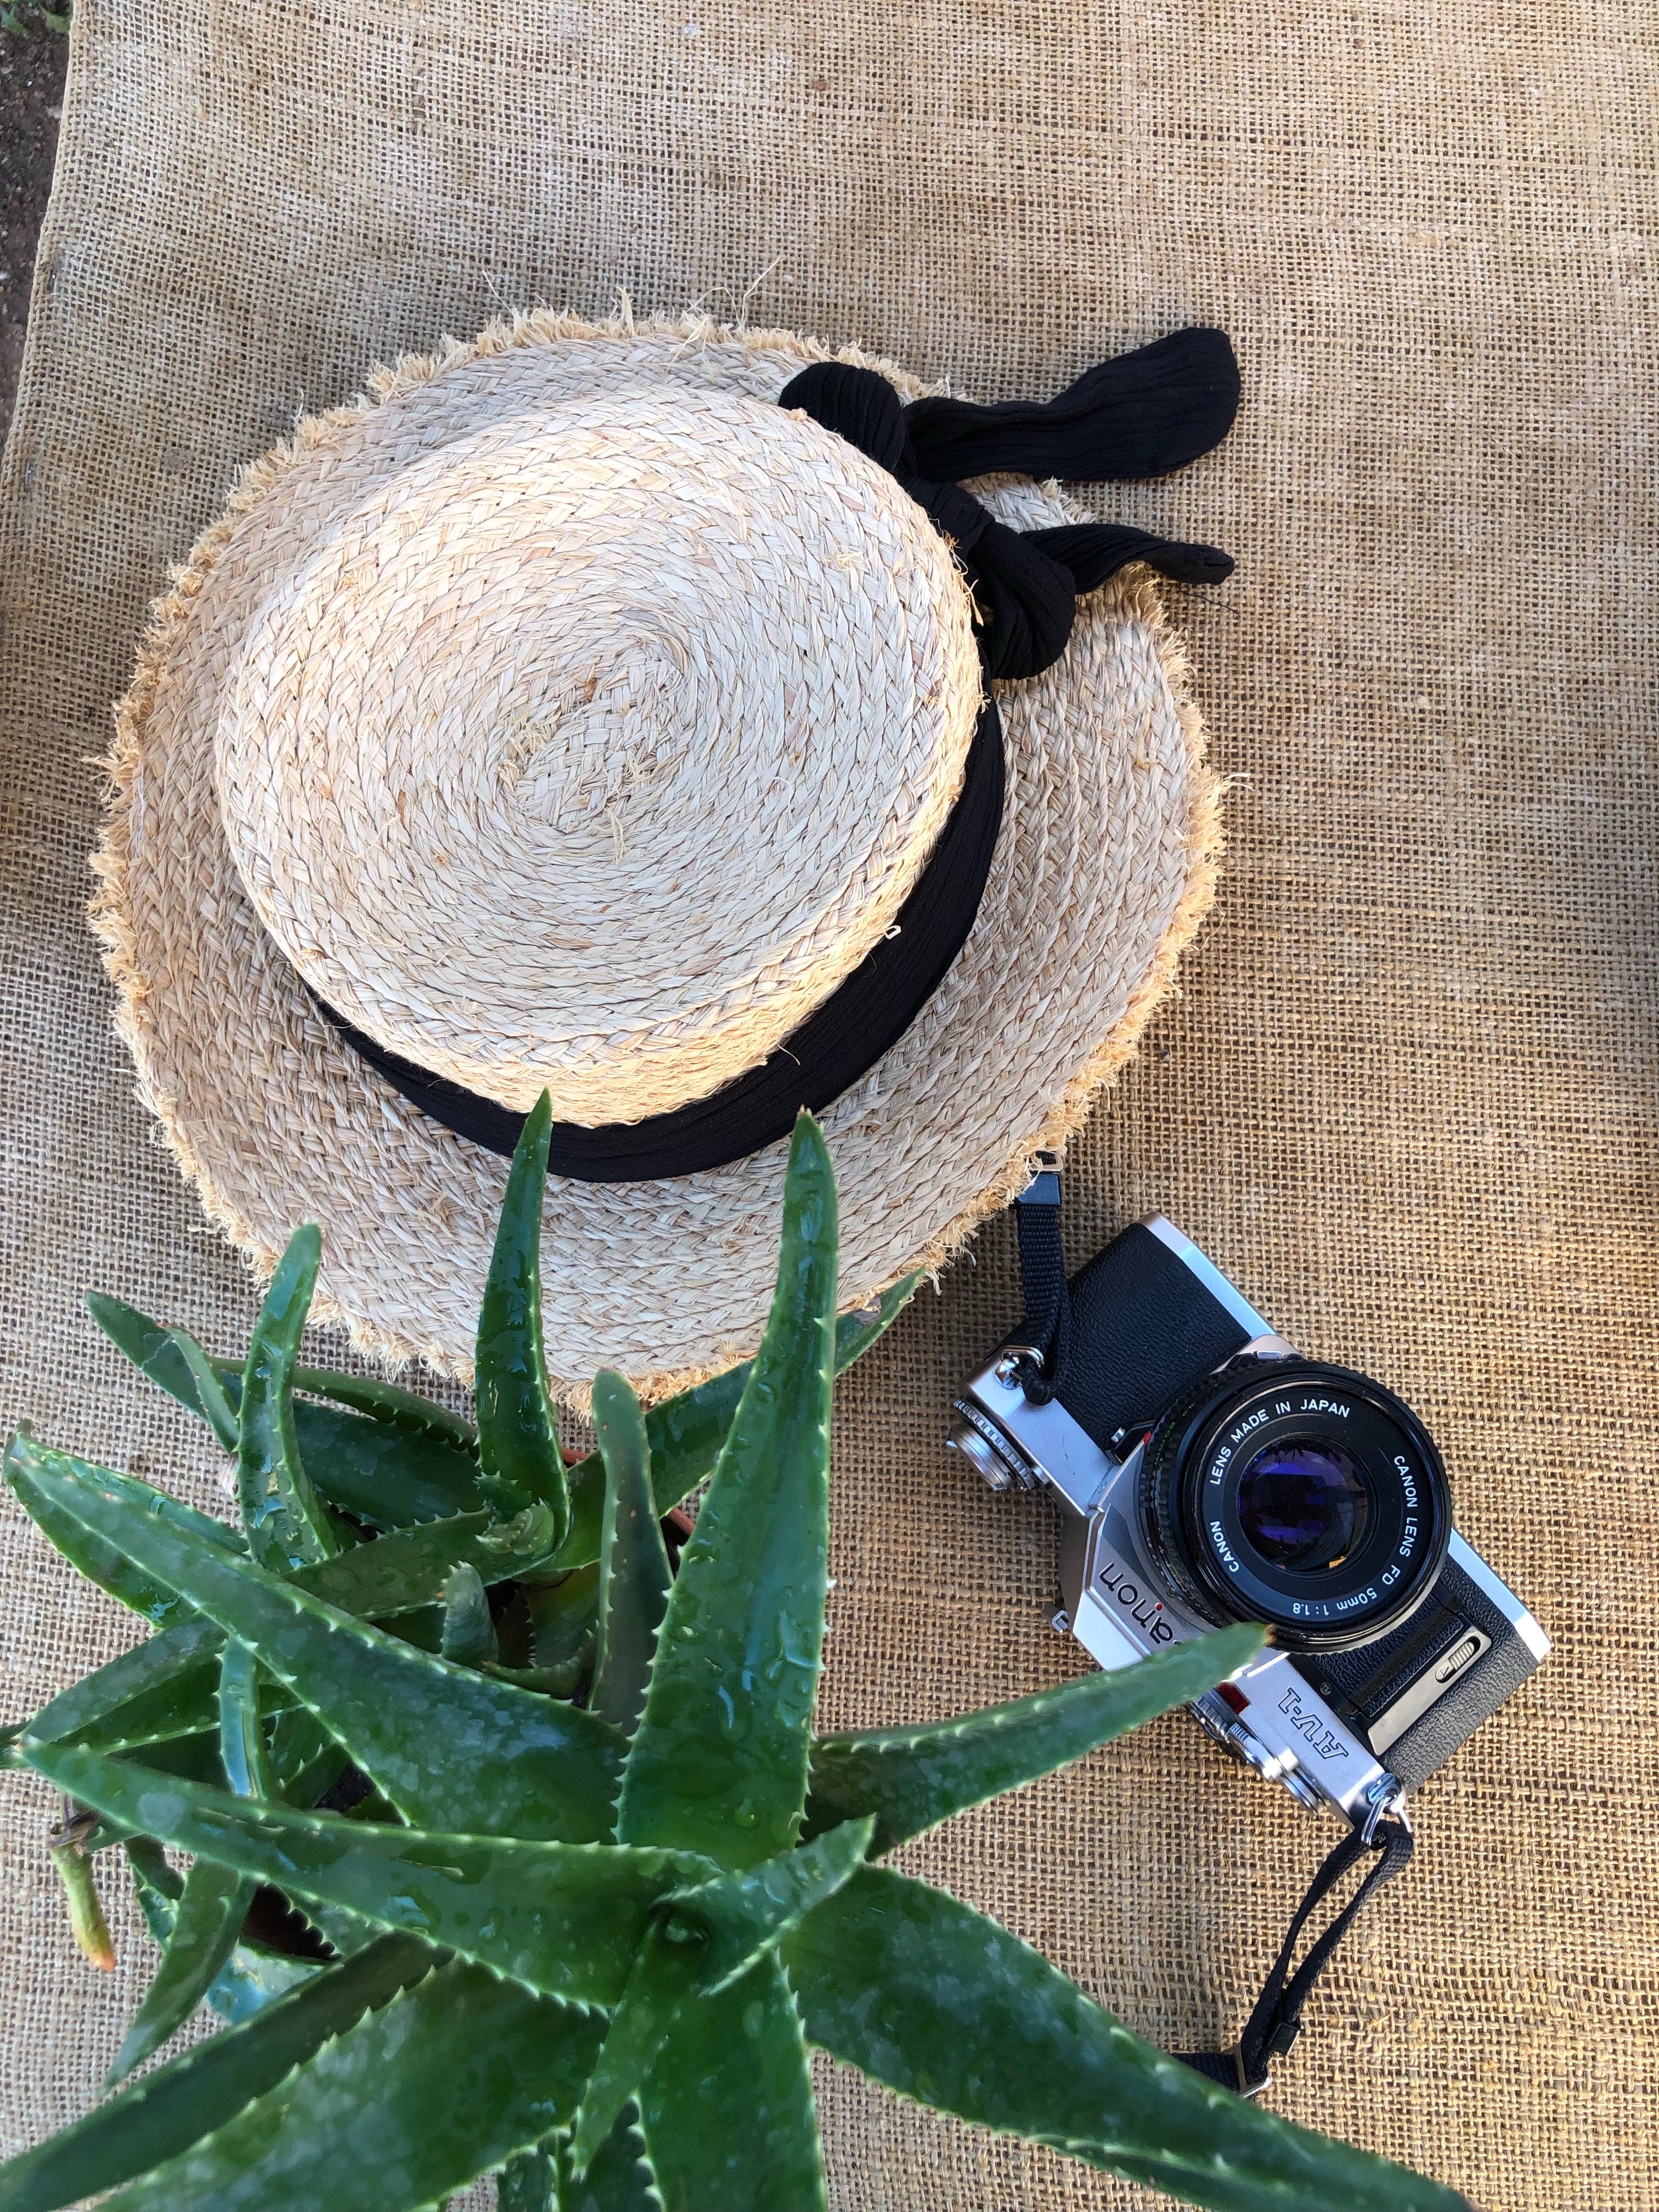 An aloe vera plant pictured beside a hat and a camera. | Source: Pexels